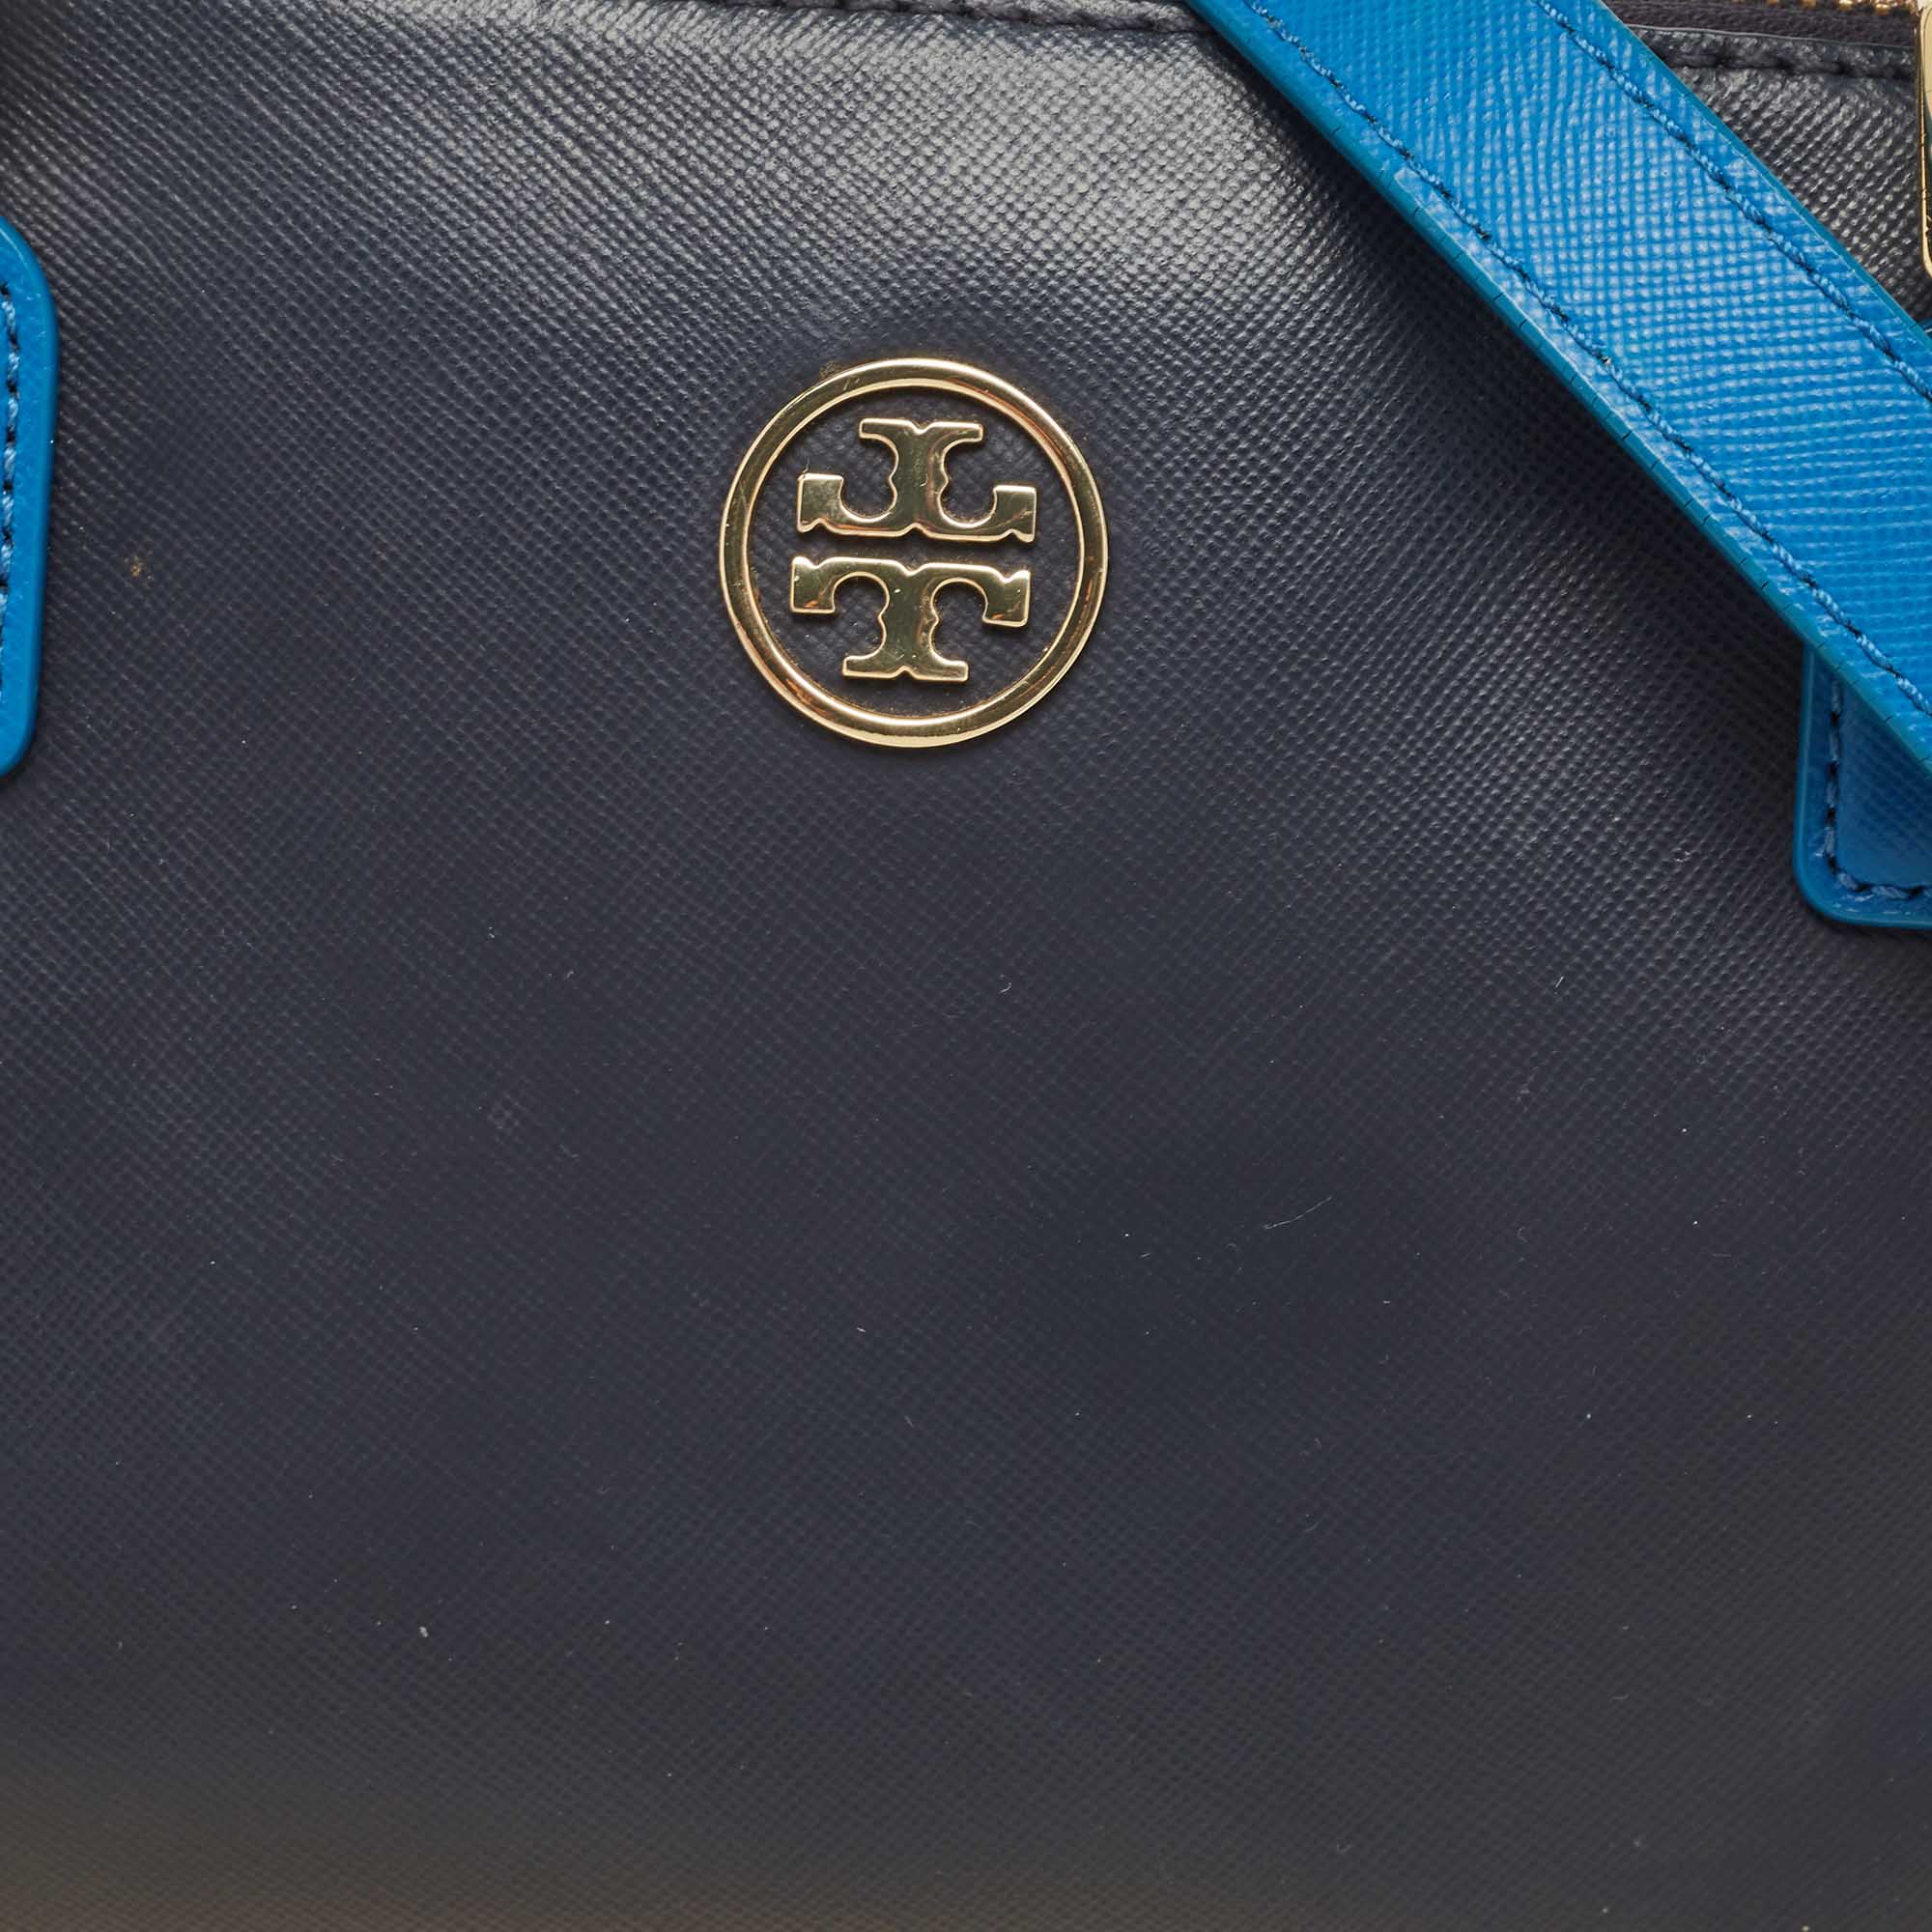 Tory Burch Two Tone Blue Leather Robinson Middy Satchel